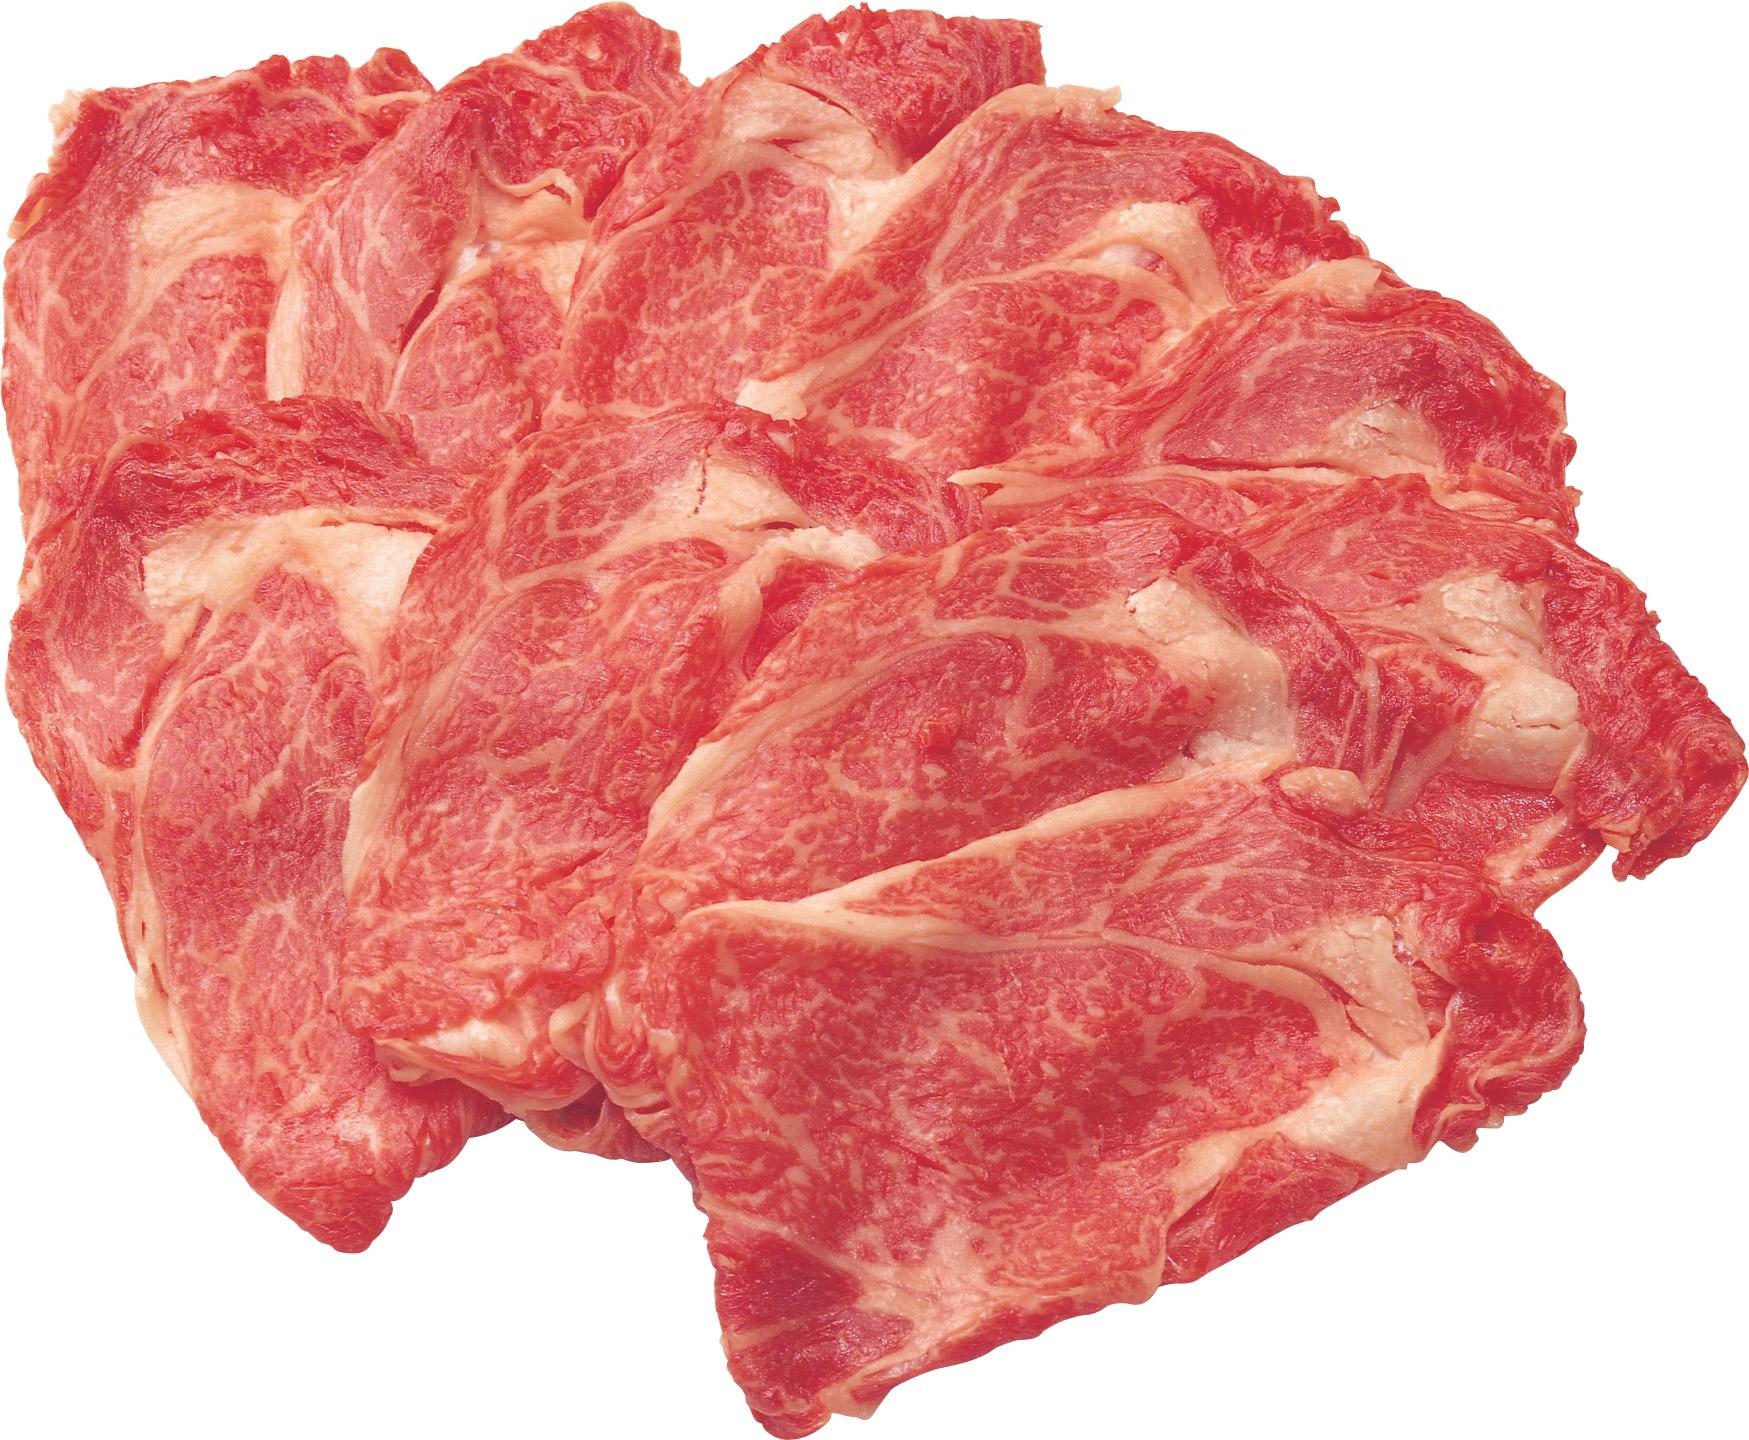 A Group Of Raw Meat